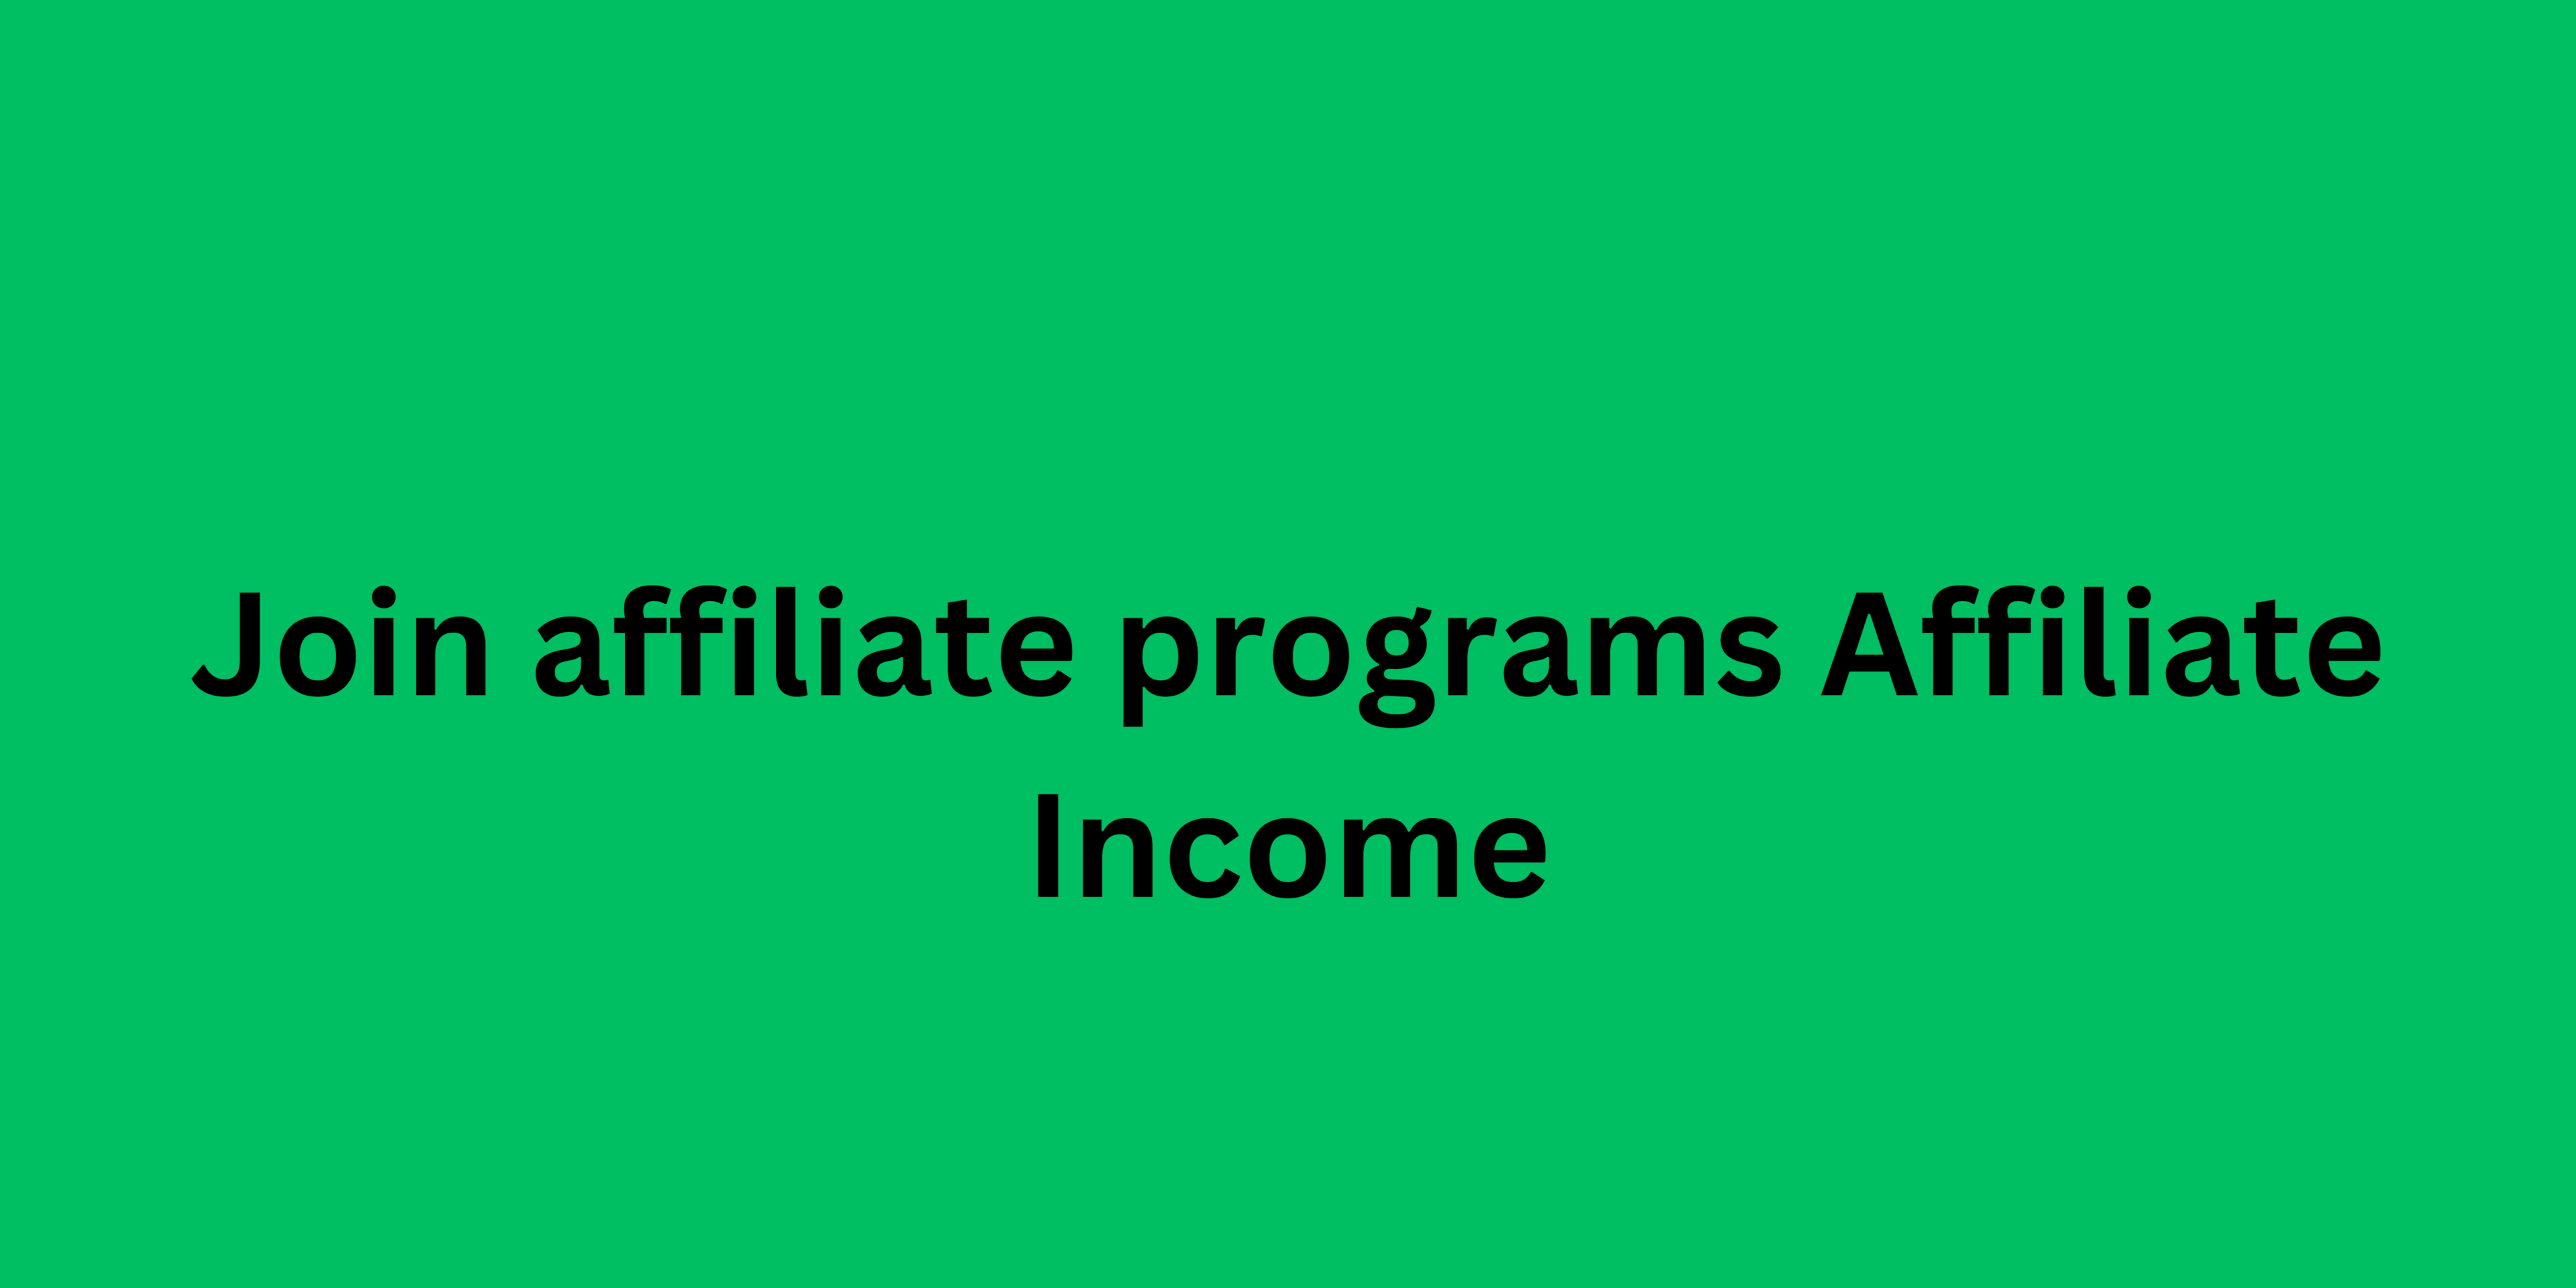 Join affiliate programs Affiliate Income